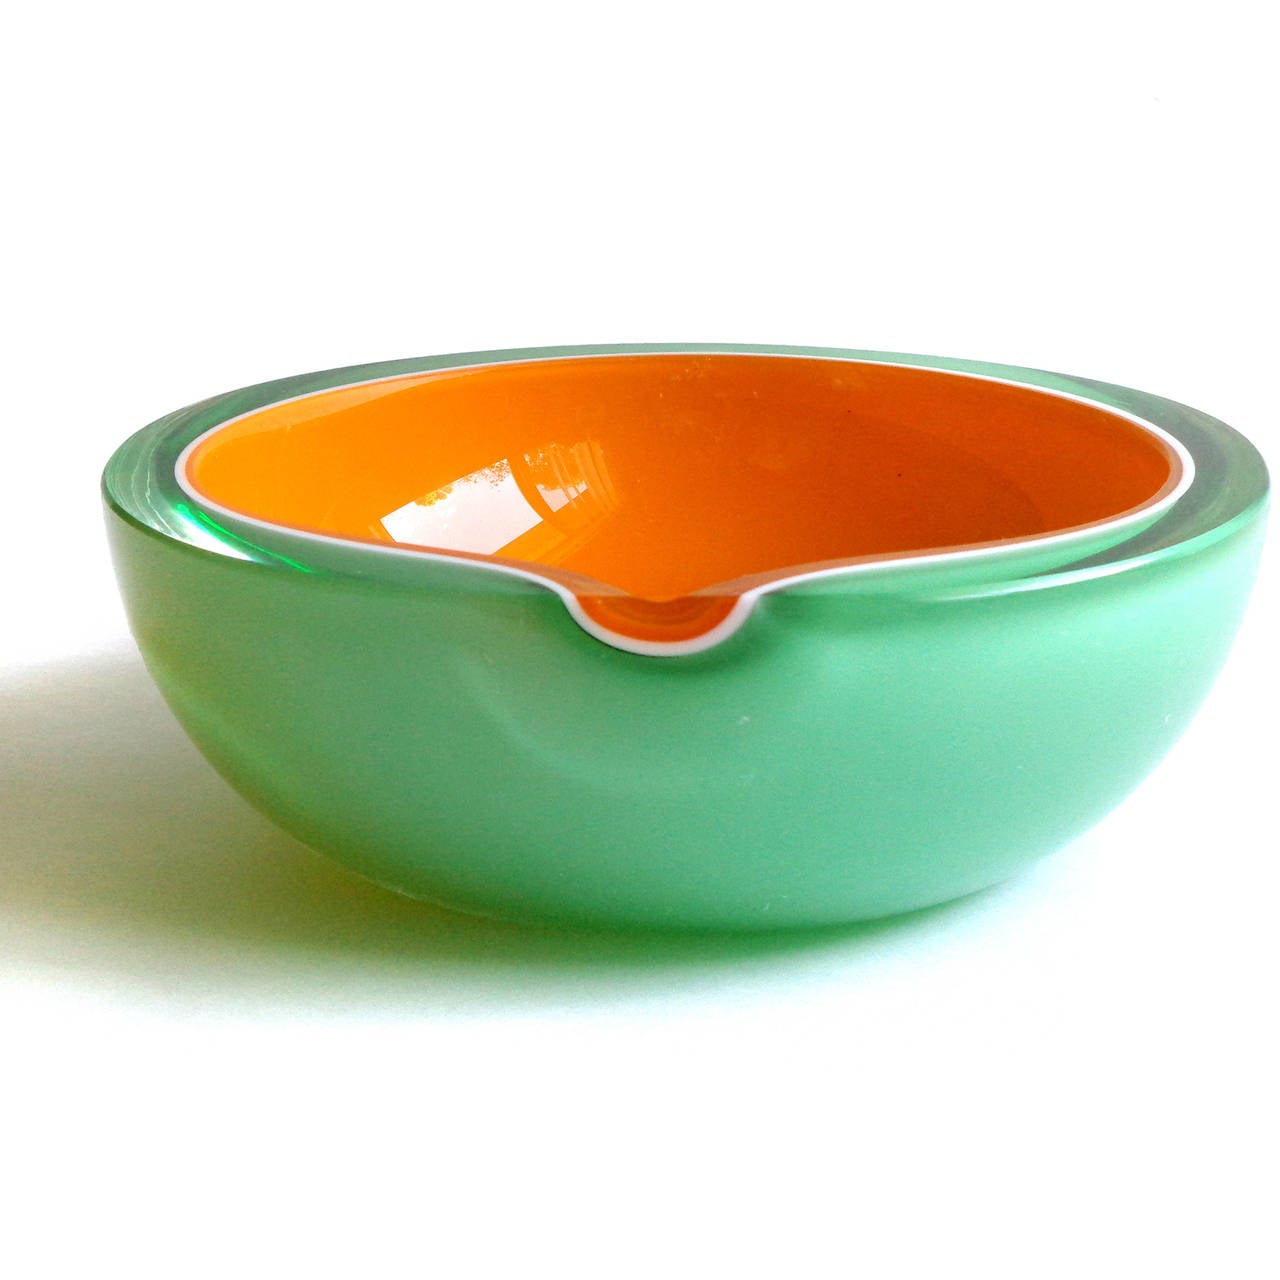 Beautiful Murano hand blown bright orange, green and white art glass melon shaped bowl. Documented to the Fratelli Toso company. The piece has a flat rim, with a flat cut side (on purpose). It is made with 4 layers of glass. Gorgeous color and